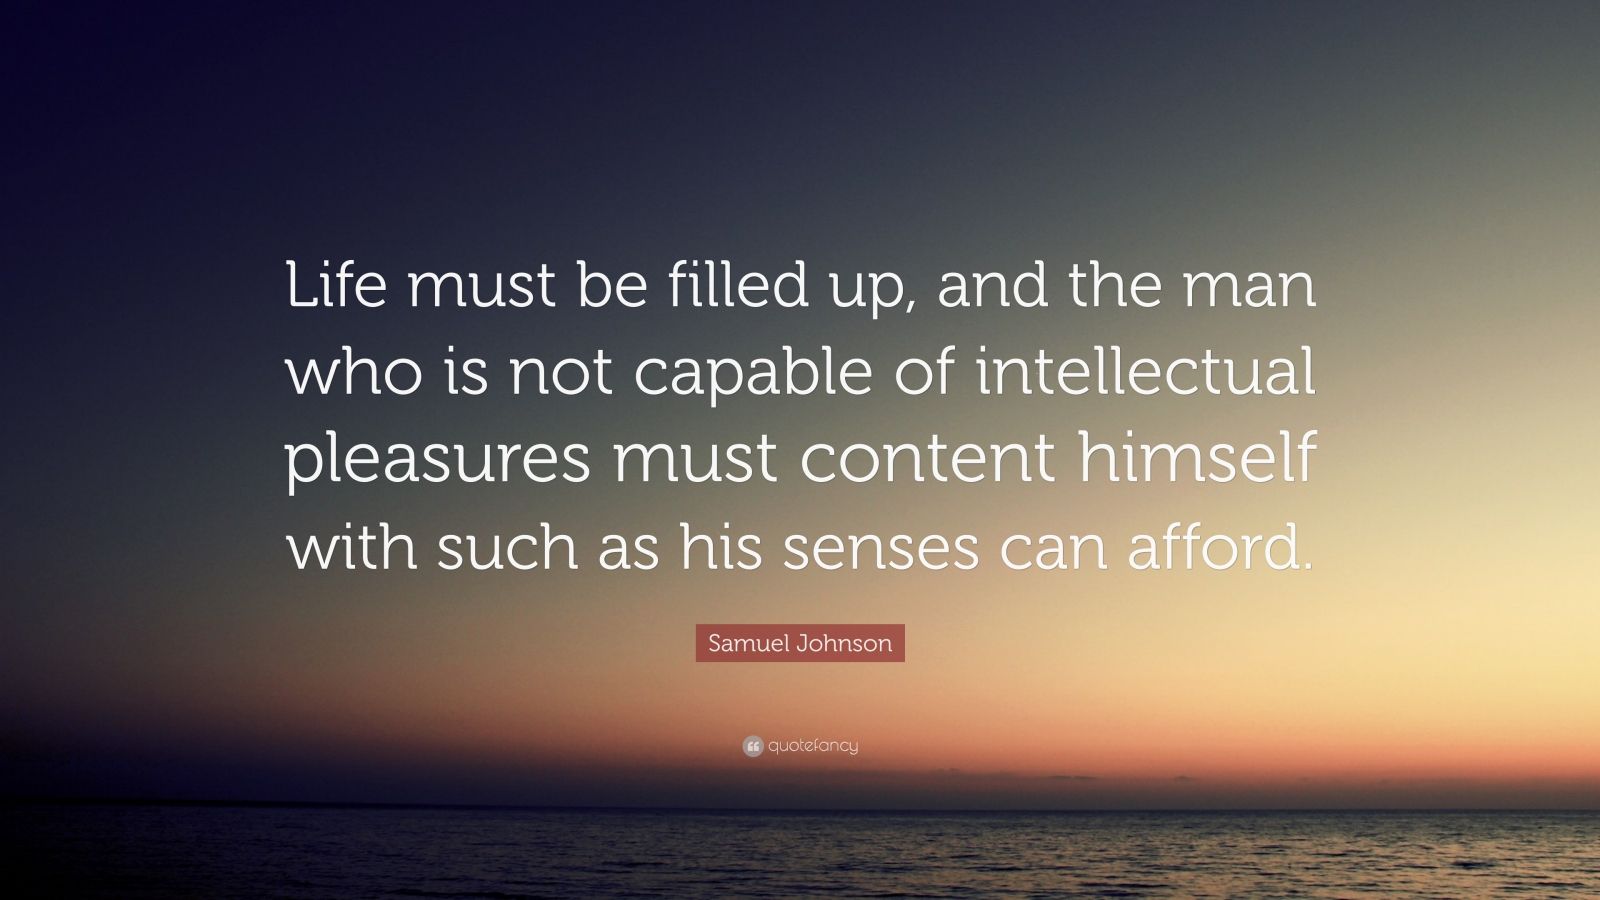 Samuel Johnson Quote: “Life must be filled up, and the man who is not ...